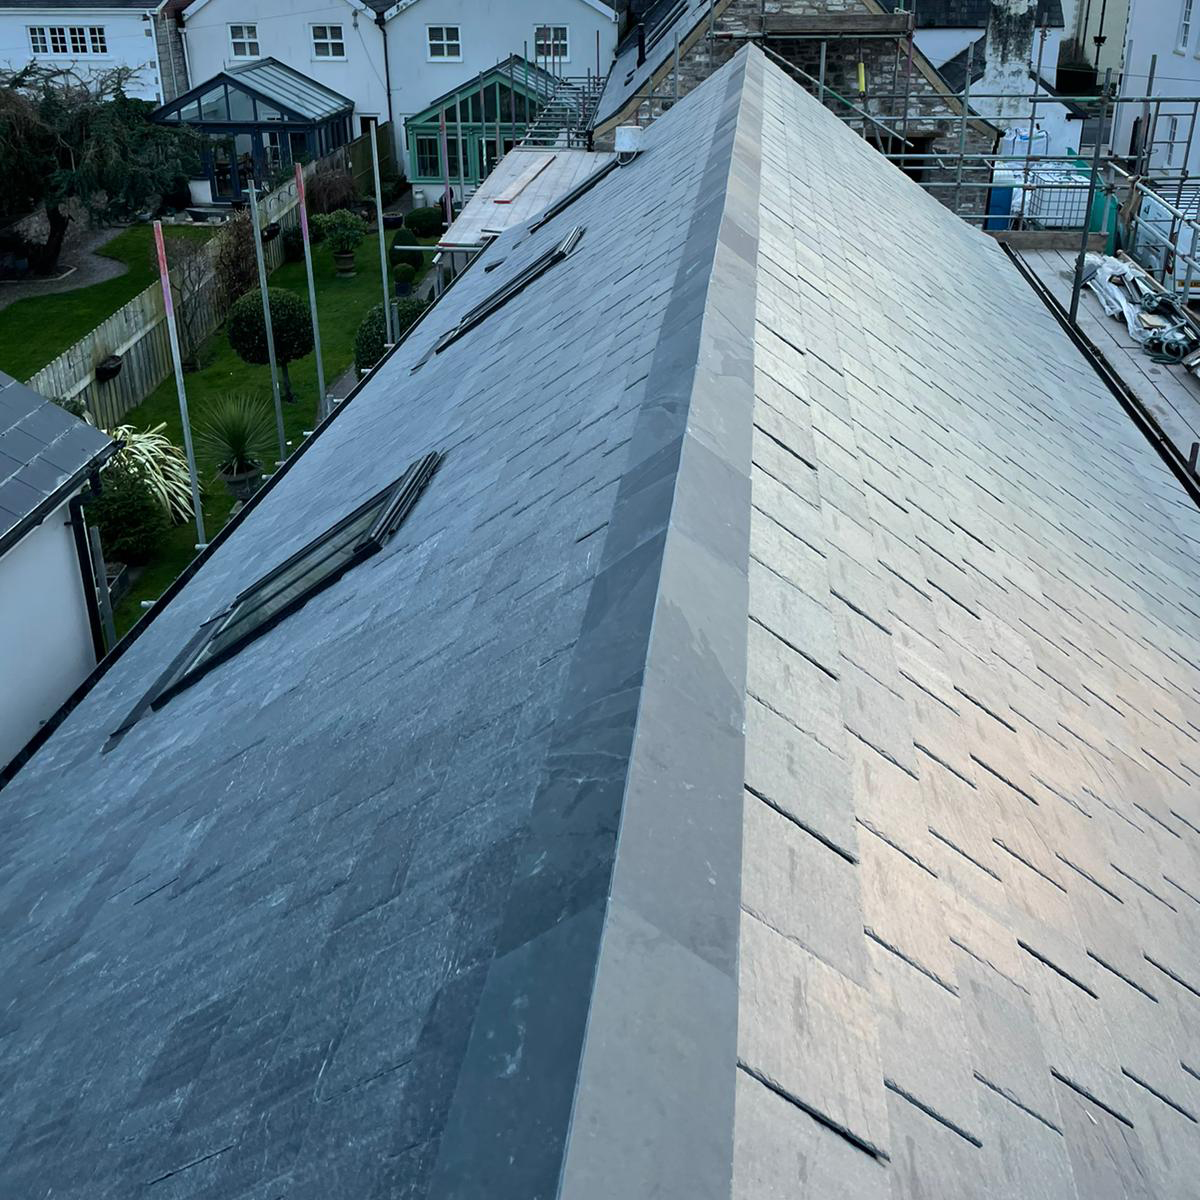 All-in-one RealRidge Slate - only the best ridge for the best home